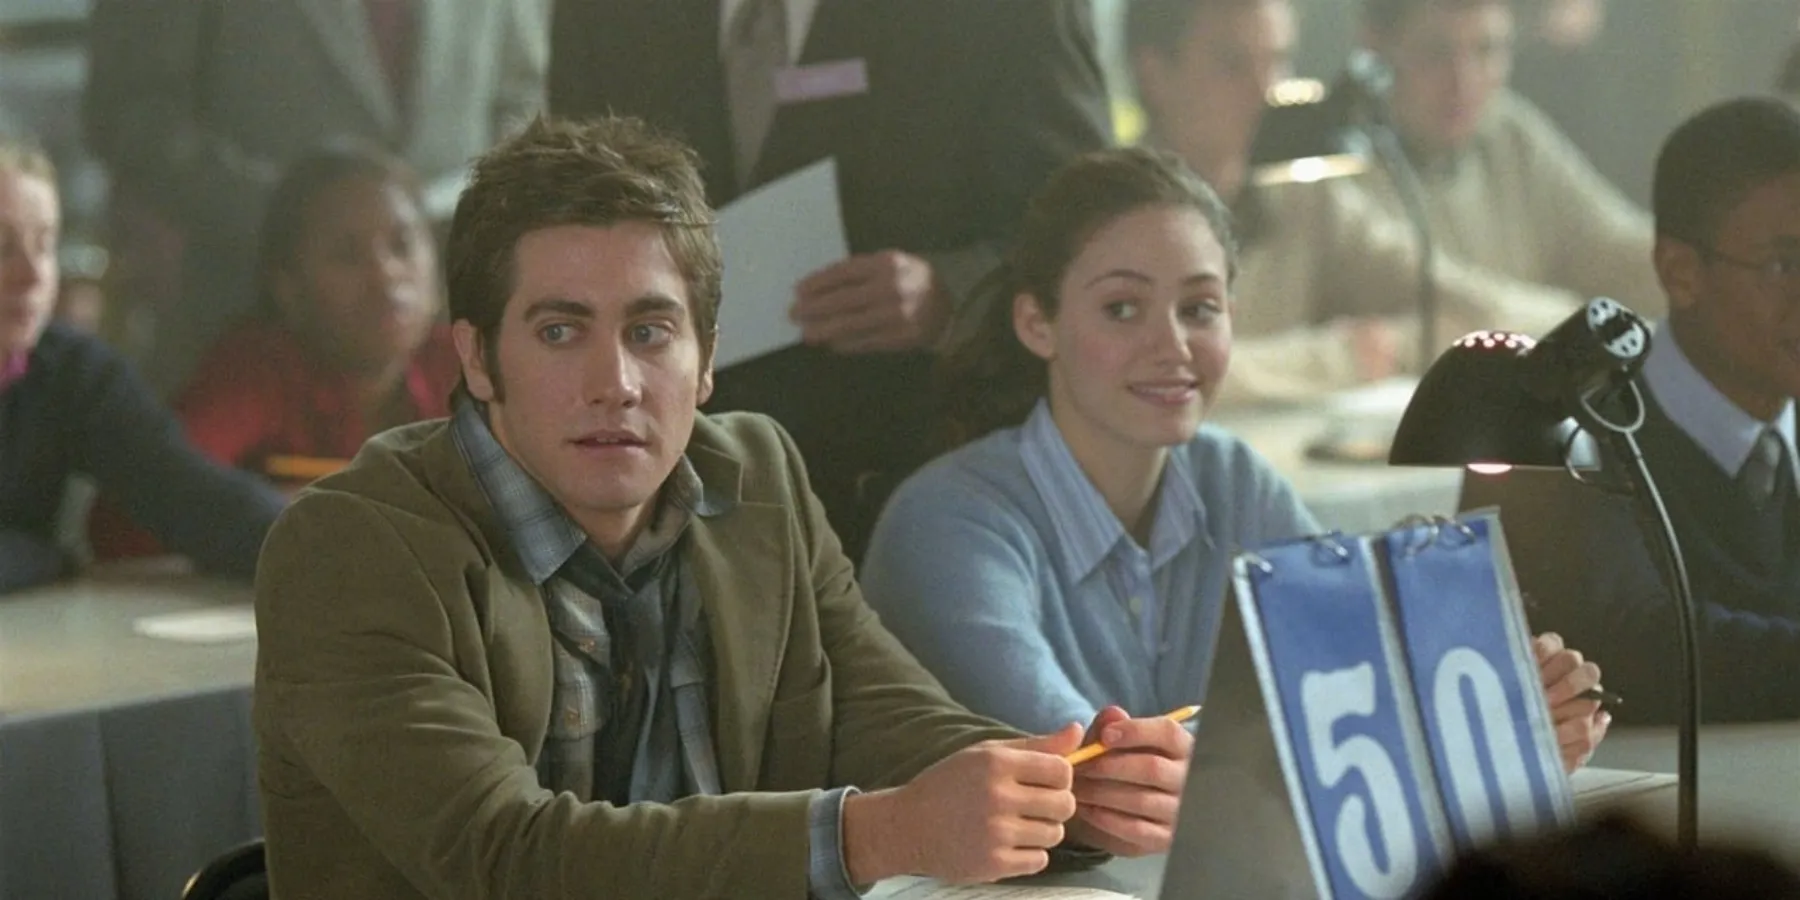 Jake Gyllenhaal and Emmy Rossum in The Day After Tomorrow